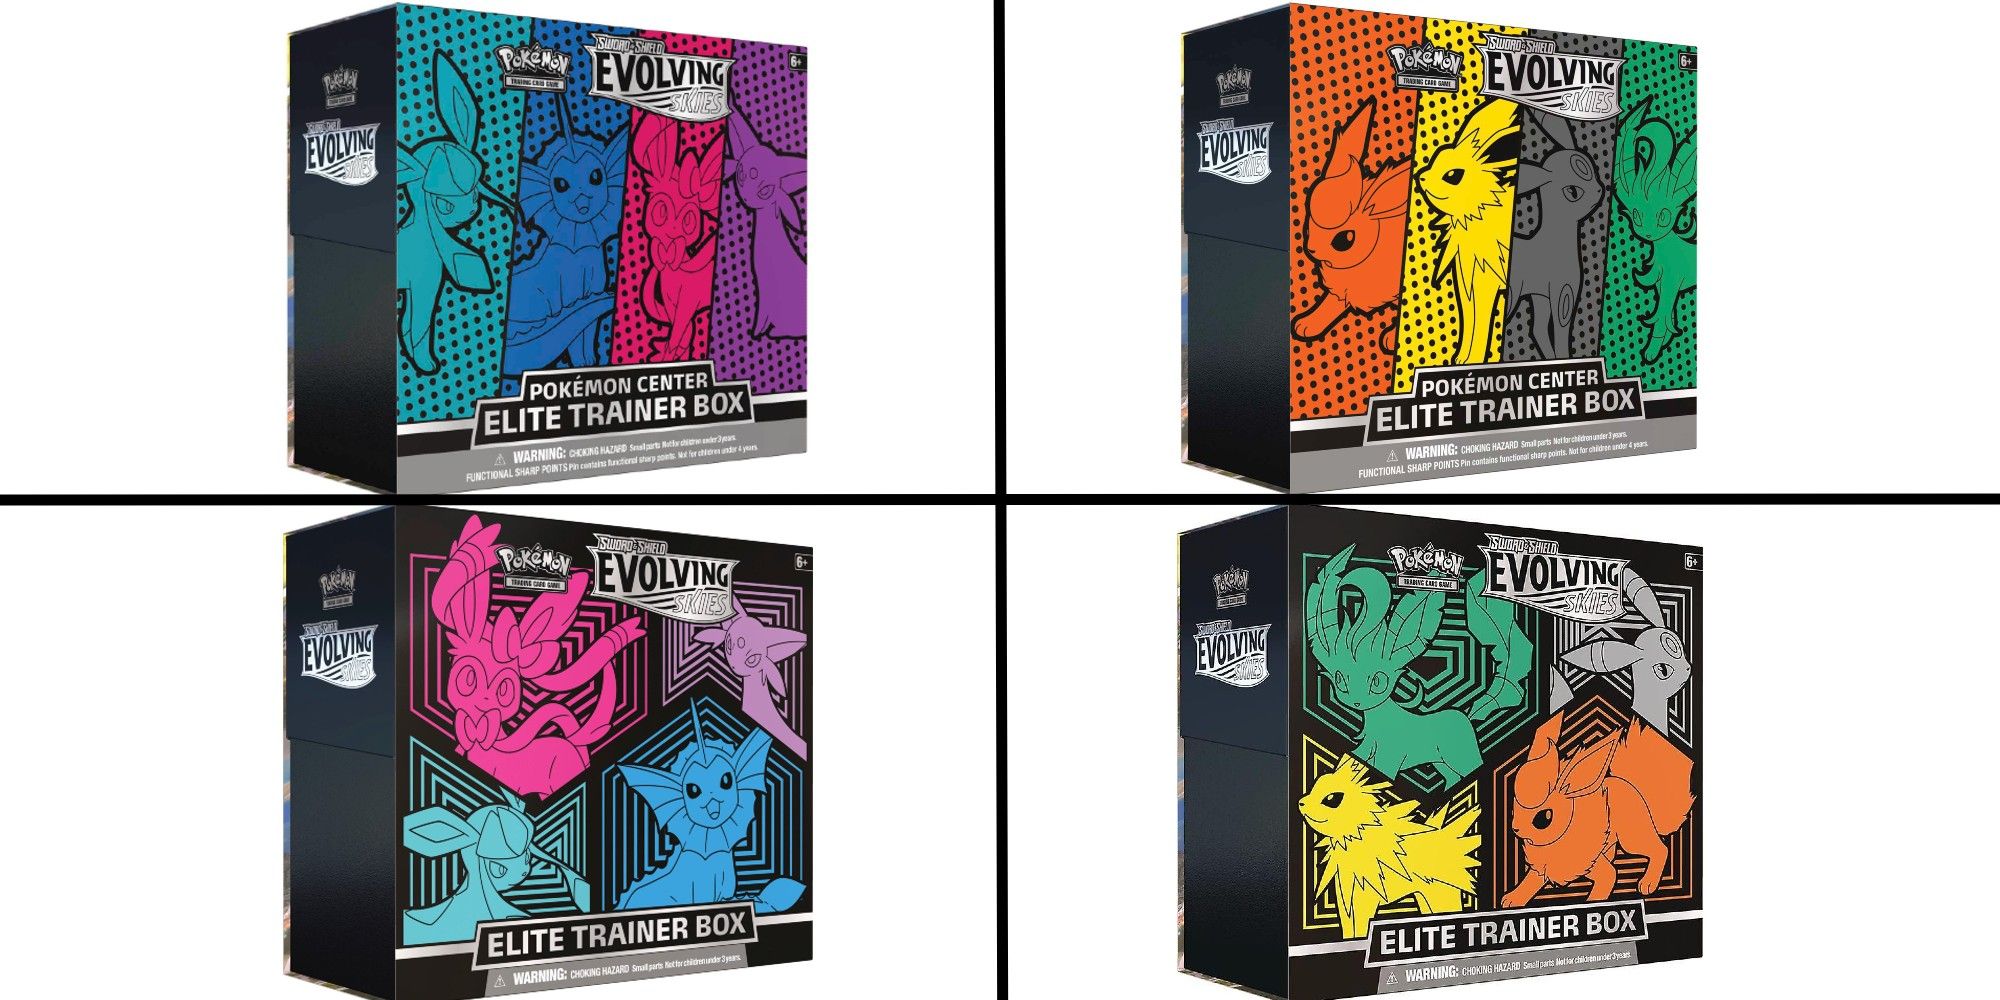 Evolving Skies Elite Trainer Boxes: All four boxes with with all the eeveelutions on them